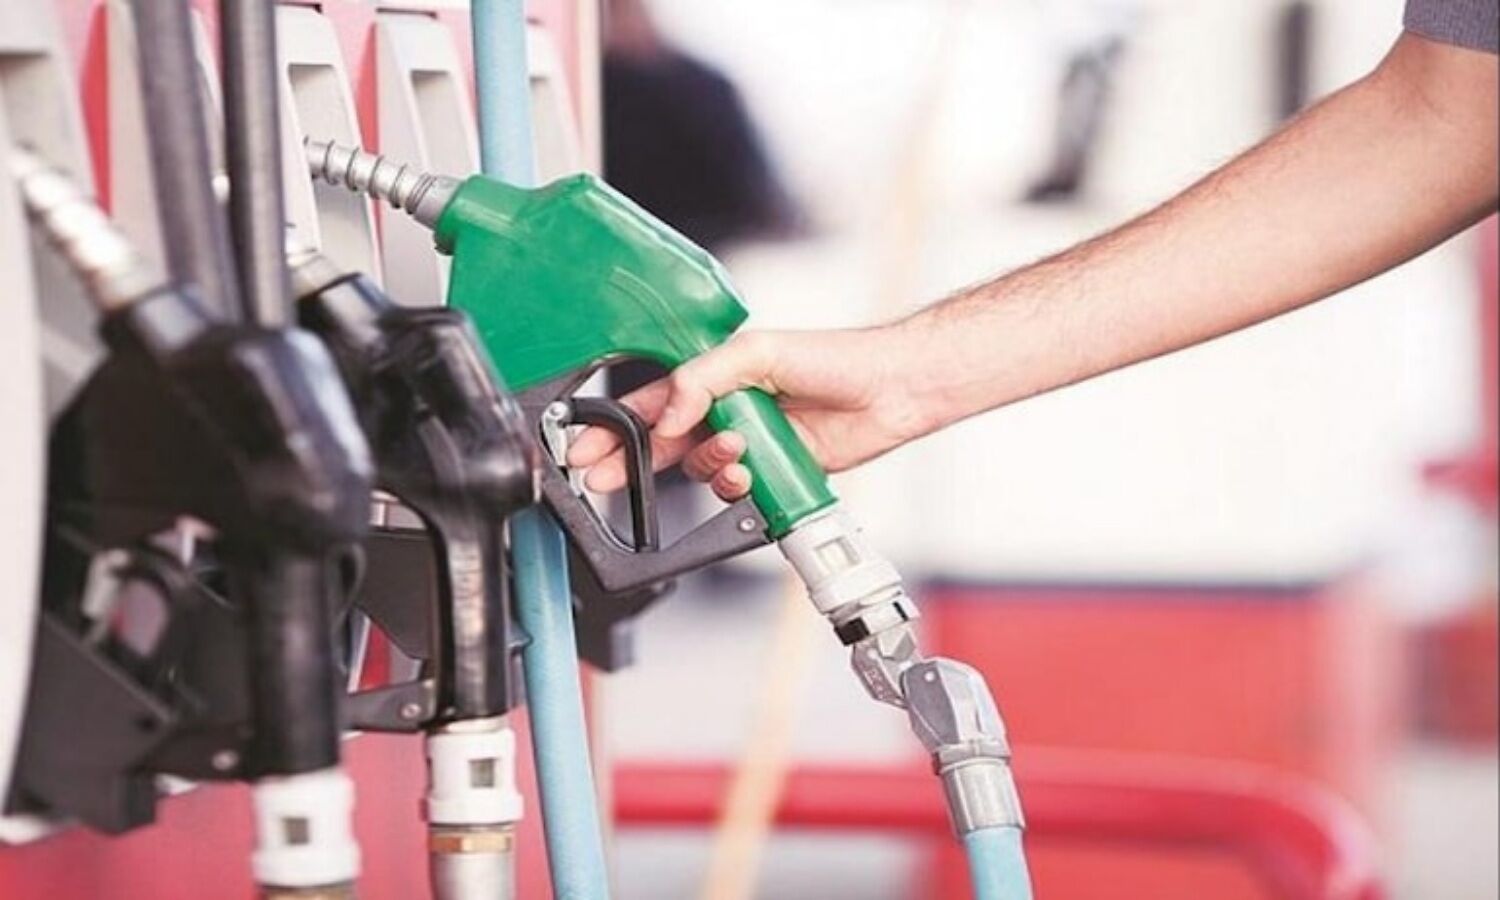 Petrol-Diesel Price Today: Before filling the tank, know the latest price of petrol and diesel today, new rate released